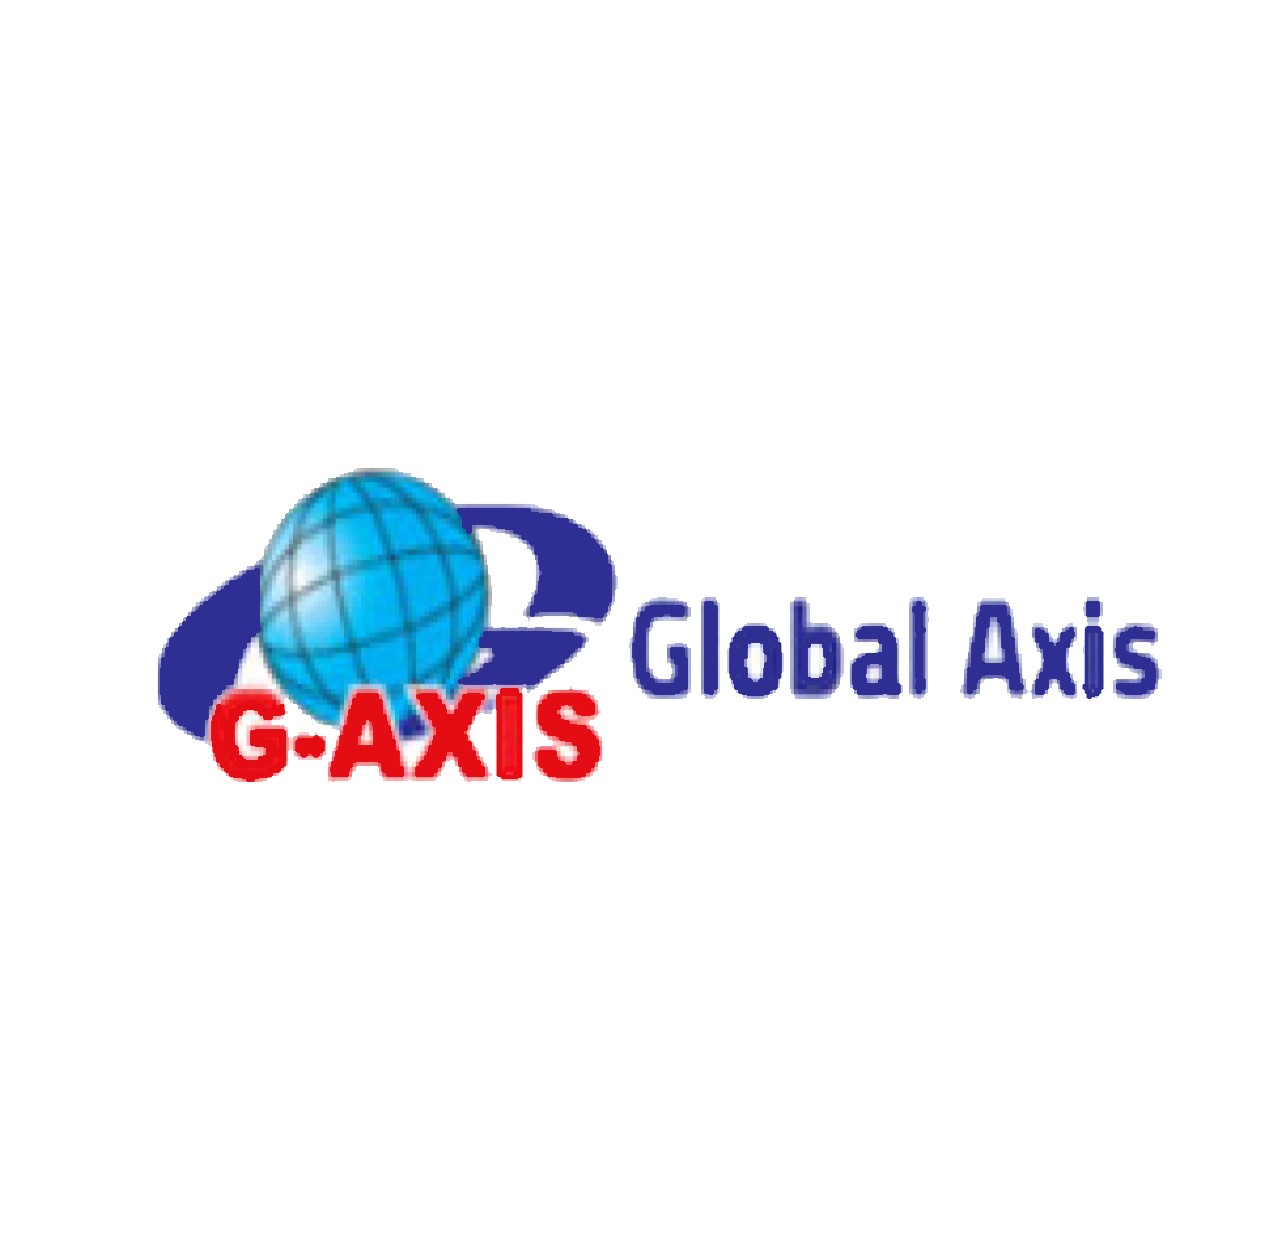 Global Axis for Trading Co.